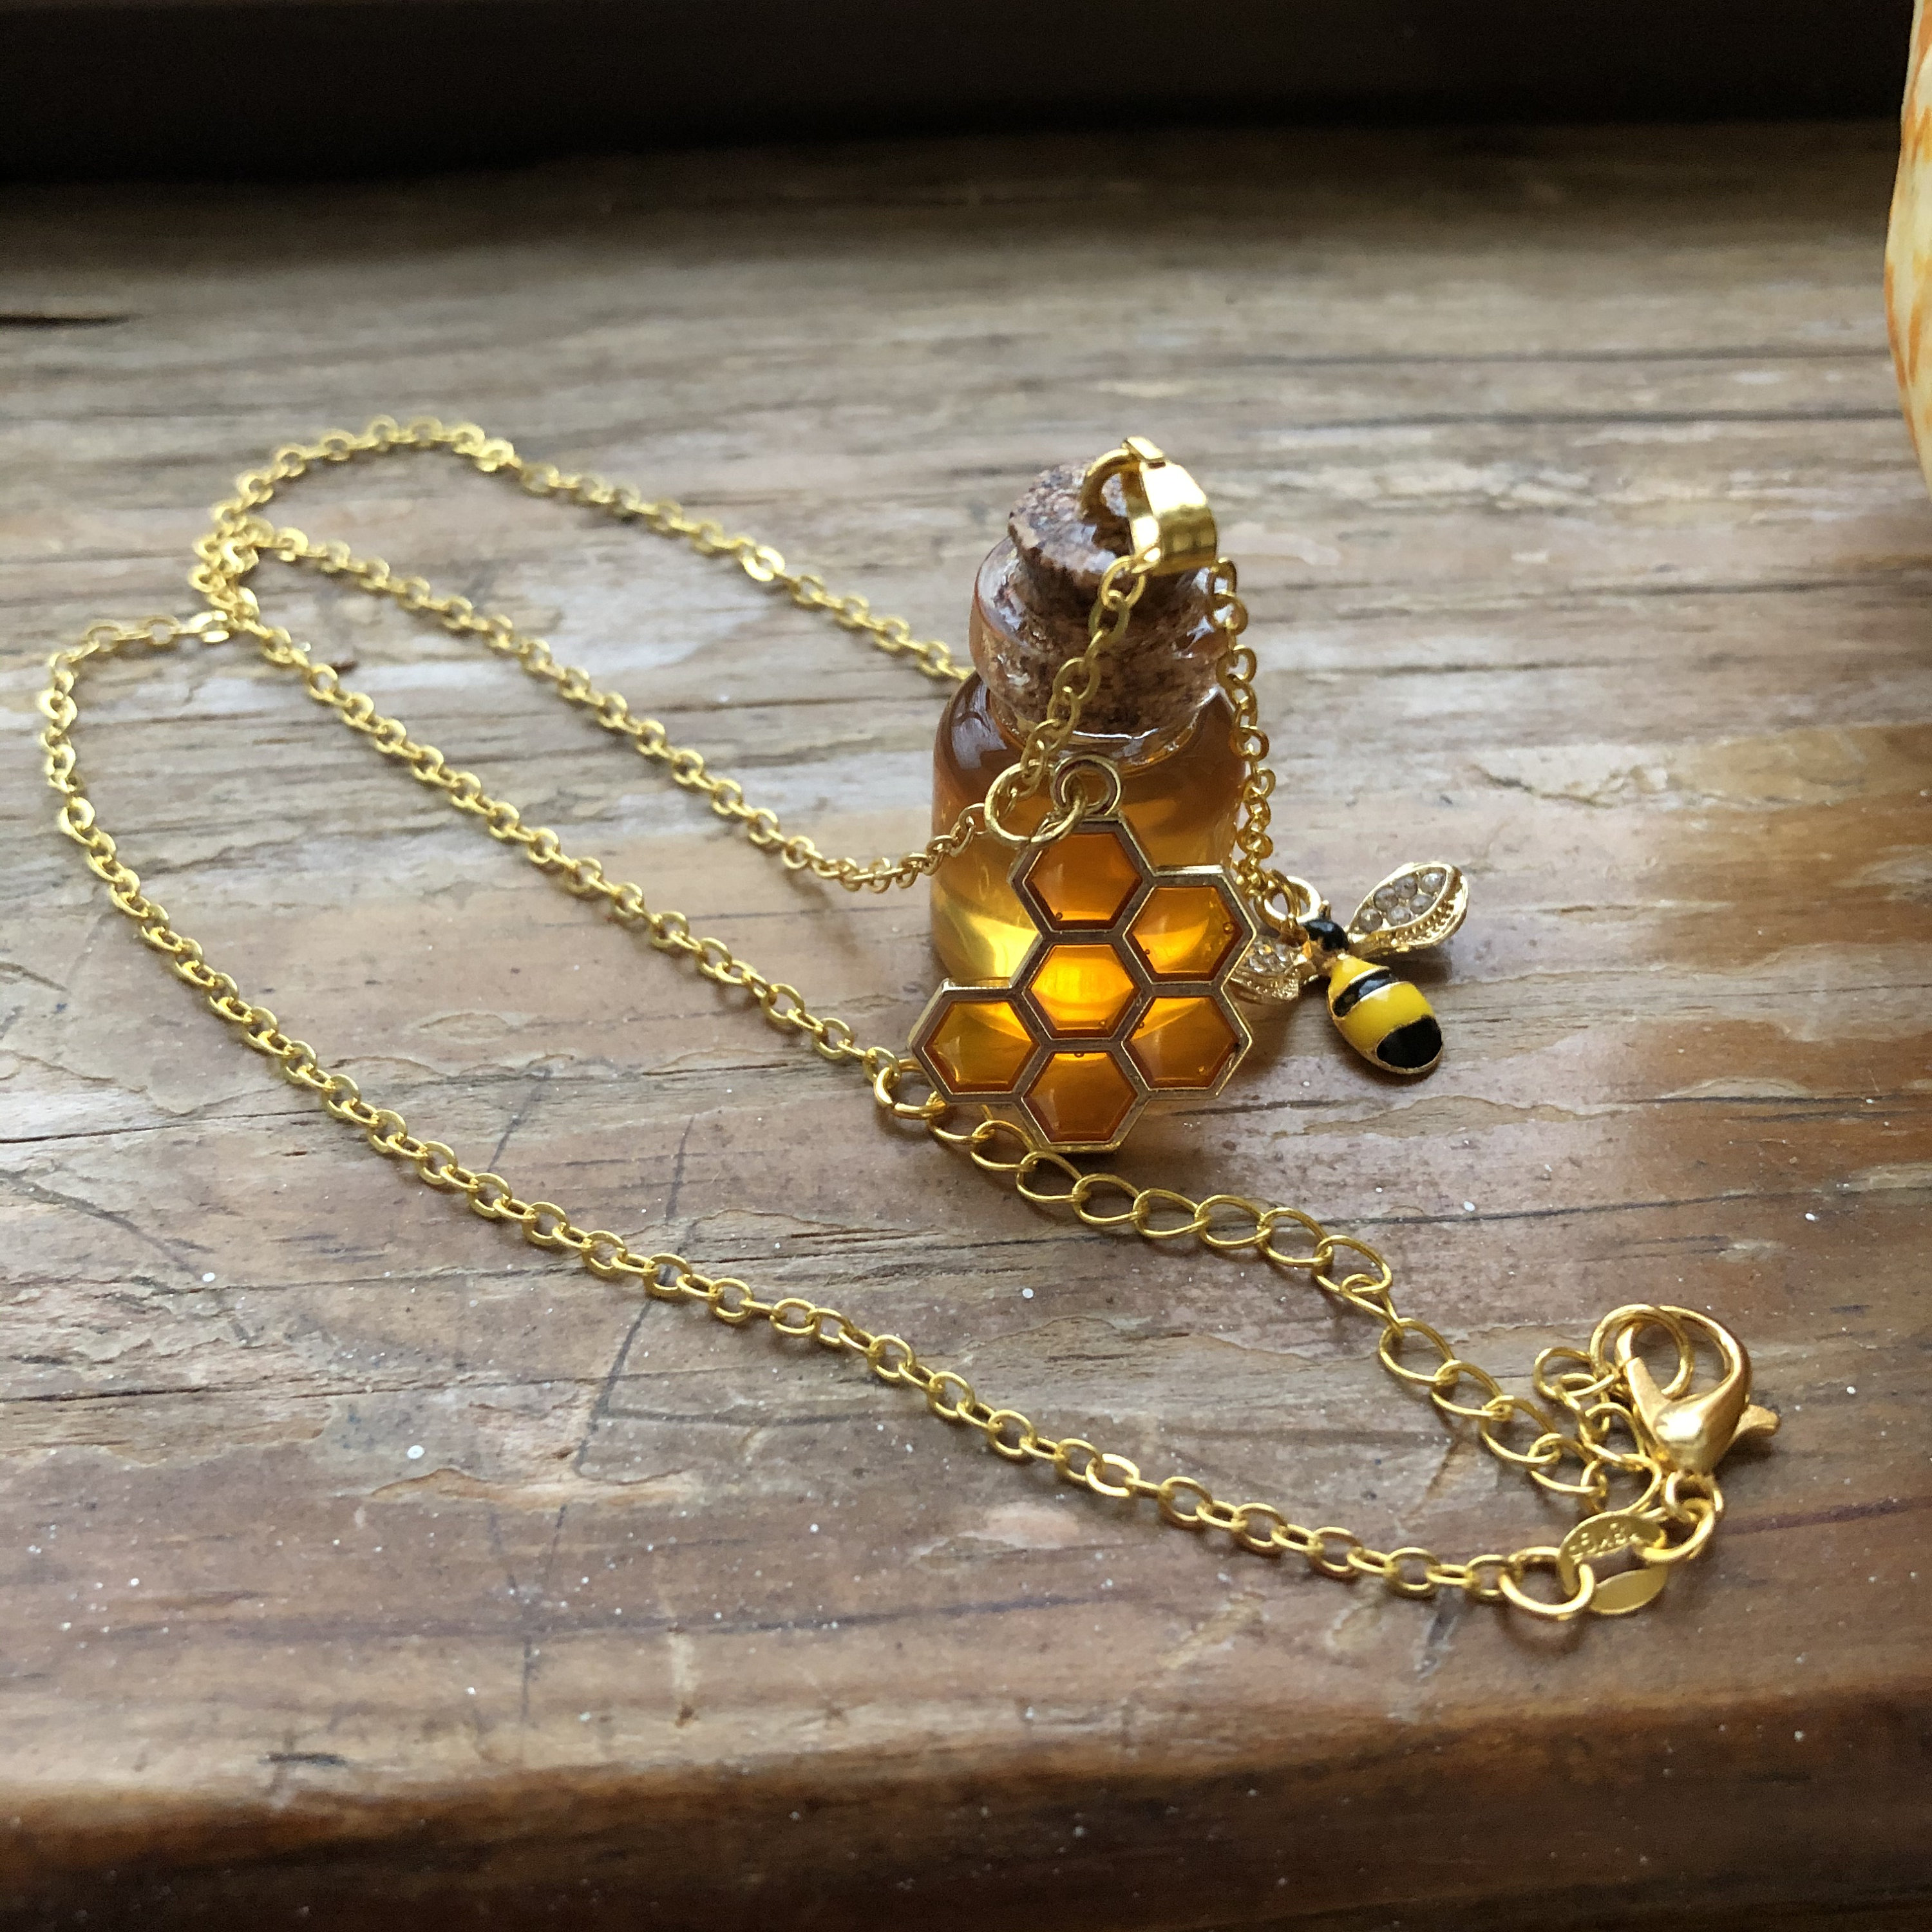 Bee and Honey Comb Gold Chain Charm Bracelet